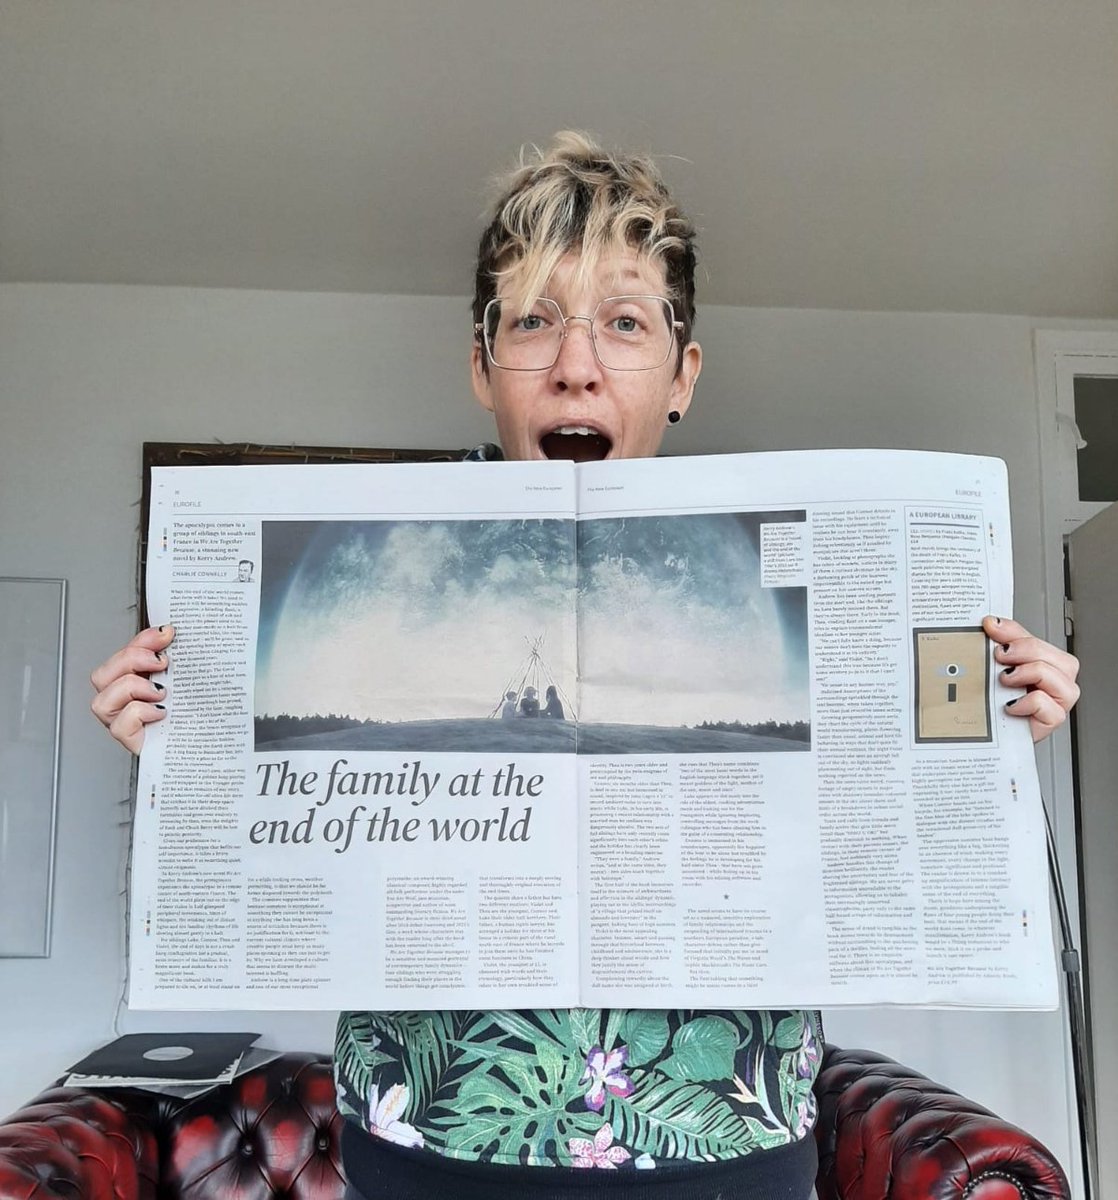 'a sensitive & nuanced portrayal of contemporary family dynamics... that transforms into a deeply moving & thoroughly original evocation of the end times.' Ta to @charlieconnelly for the LOVELY big review in @TheNewEuropean! theneweuropean.co.uk/the-family-at-… @AtlanticBooks